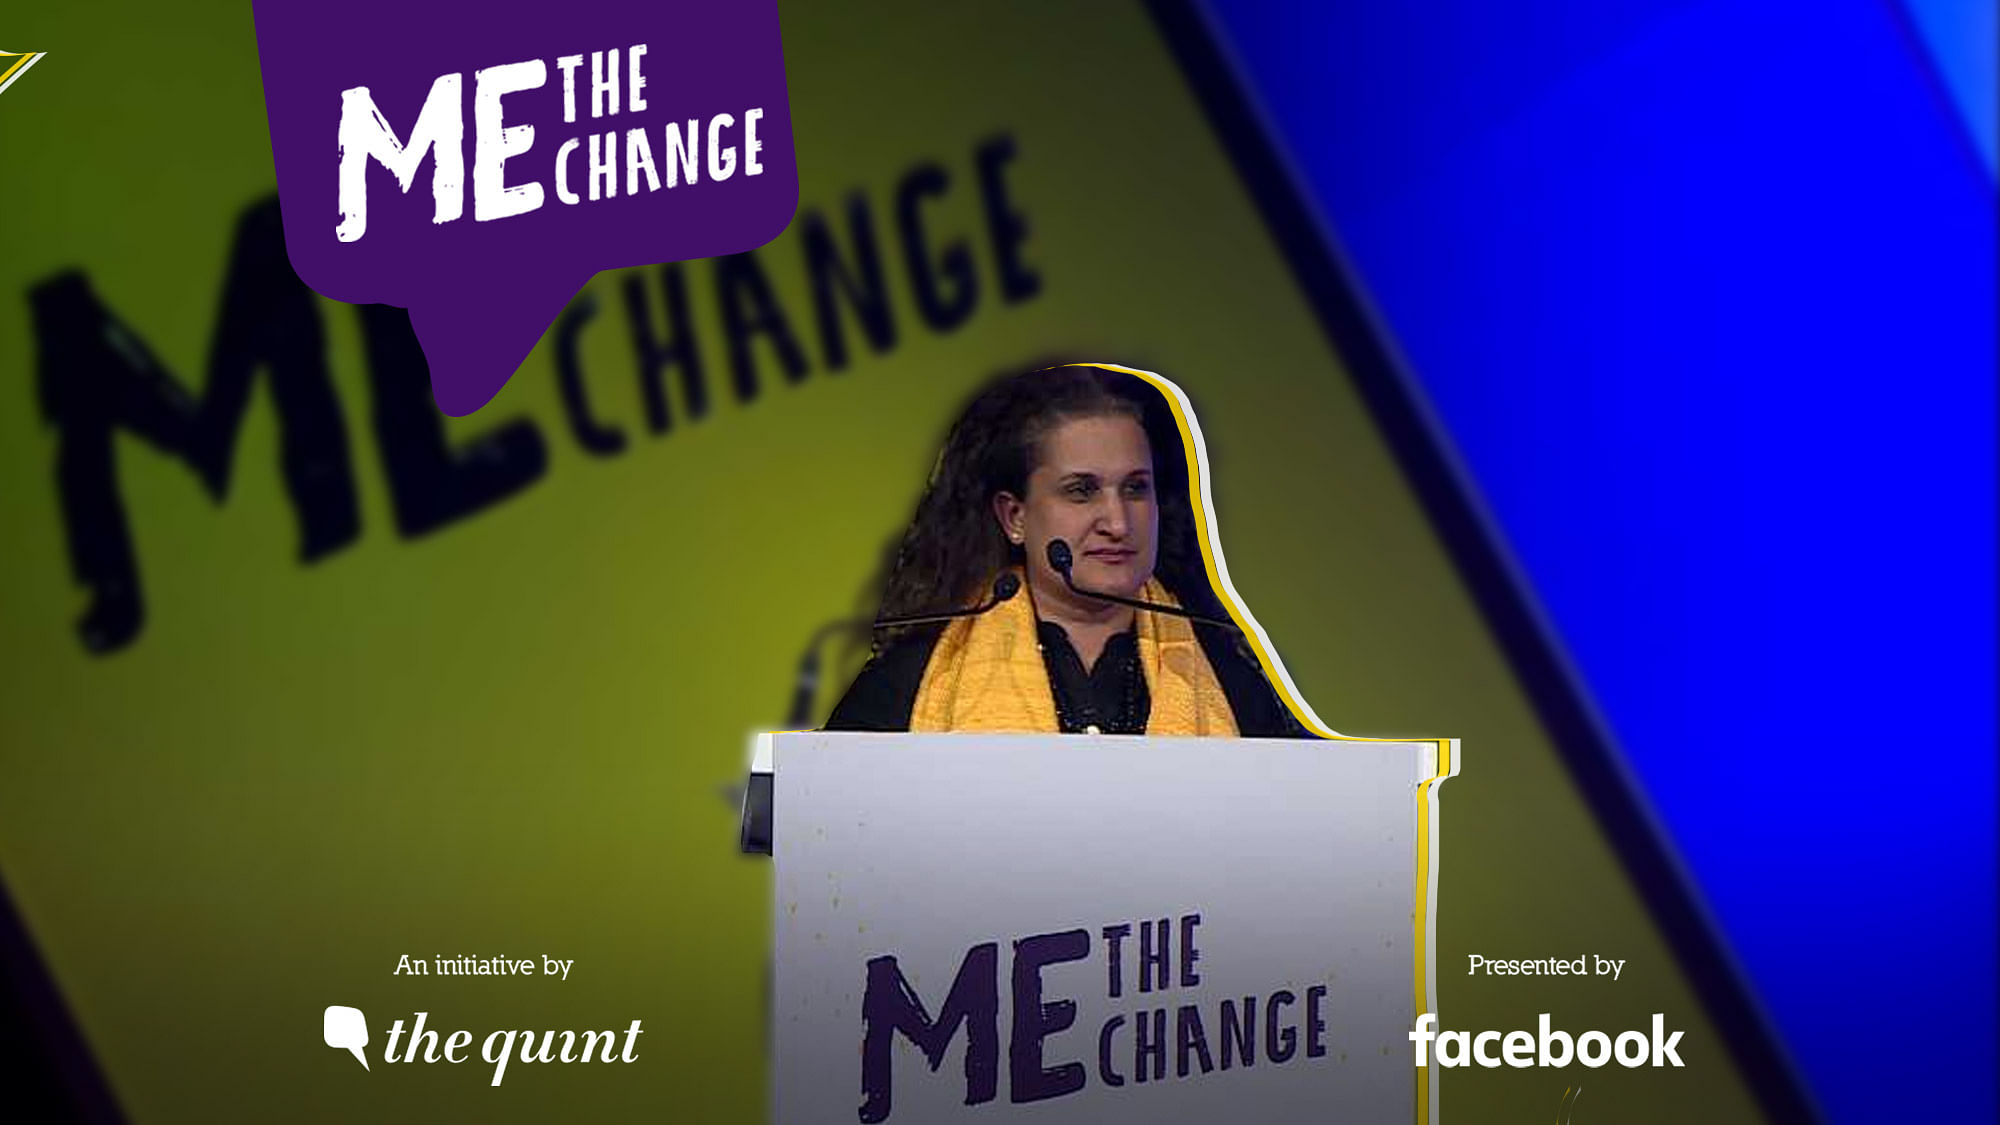 Shelley Thakral, Head of Policy Programmes (India, South Asia, and Central Asia) at Facebook, speaks at the “Me, the Change” event on India’s first-time women voters.